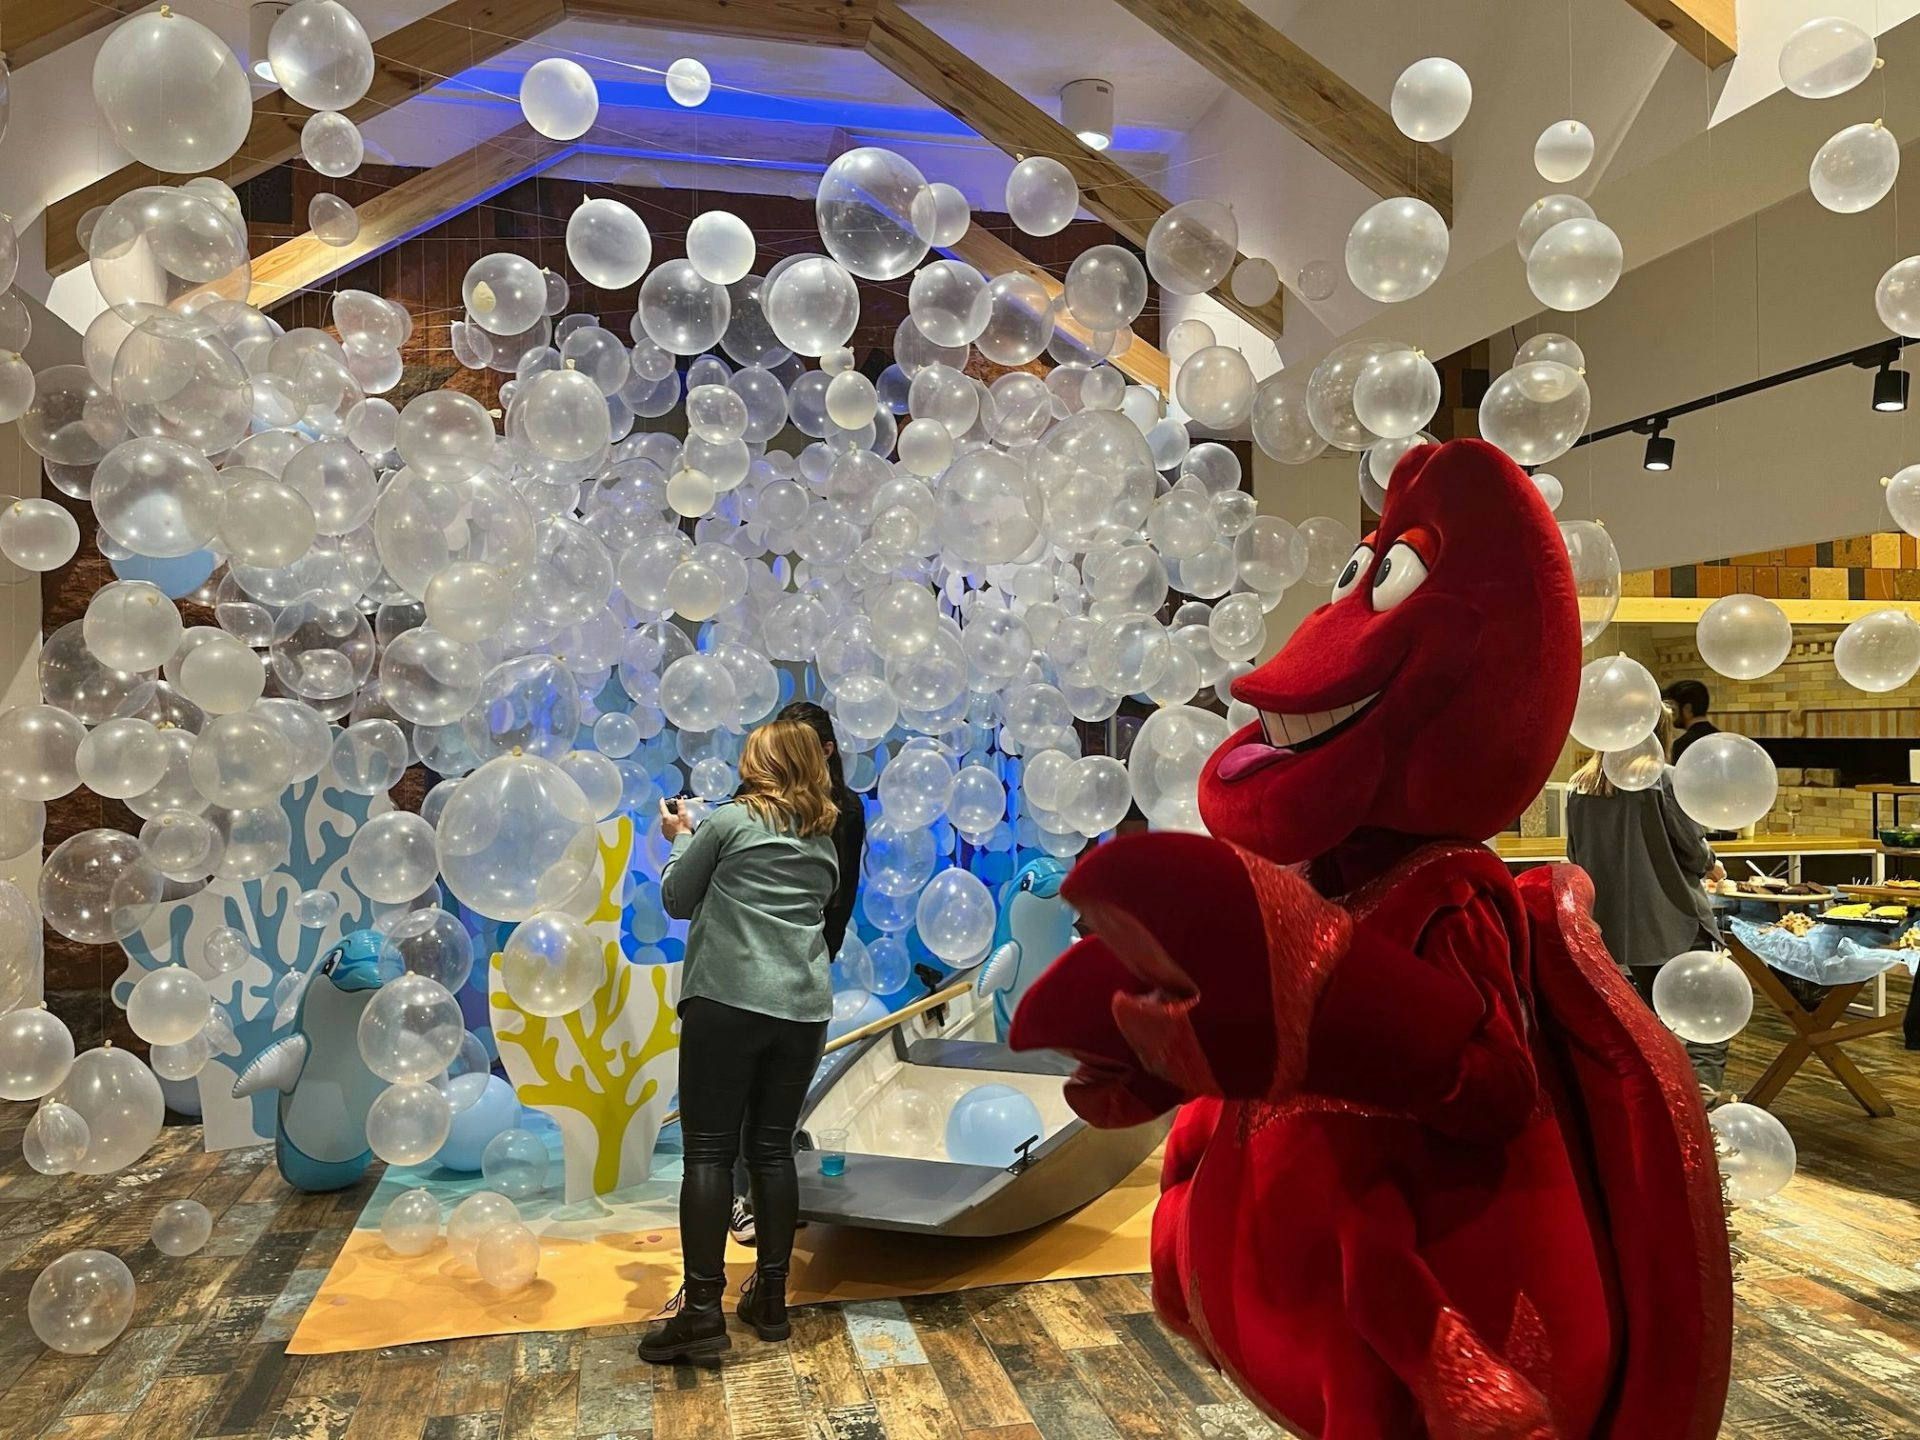 At a Miro office party, balloons float through the air like bubbles and a person dressed in a crab suit wades through the bubbles.